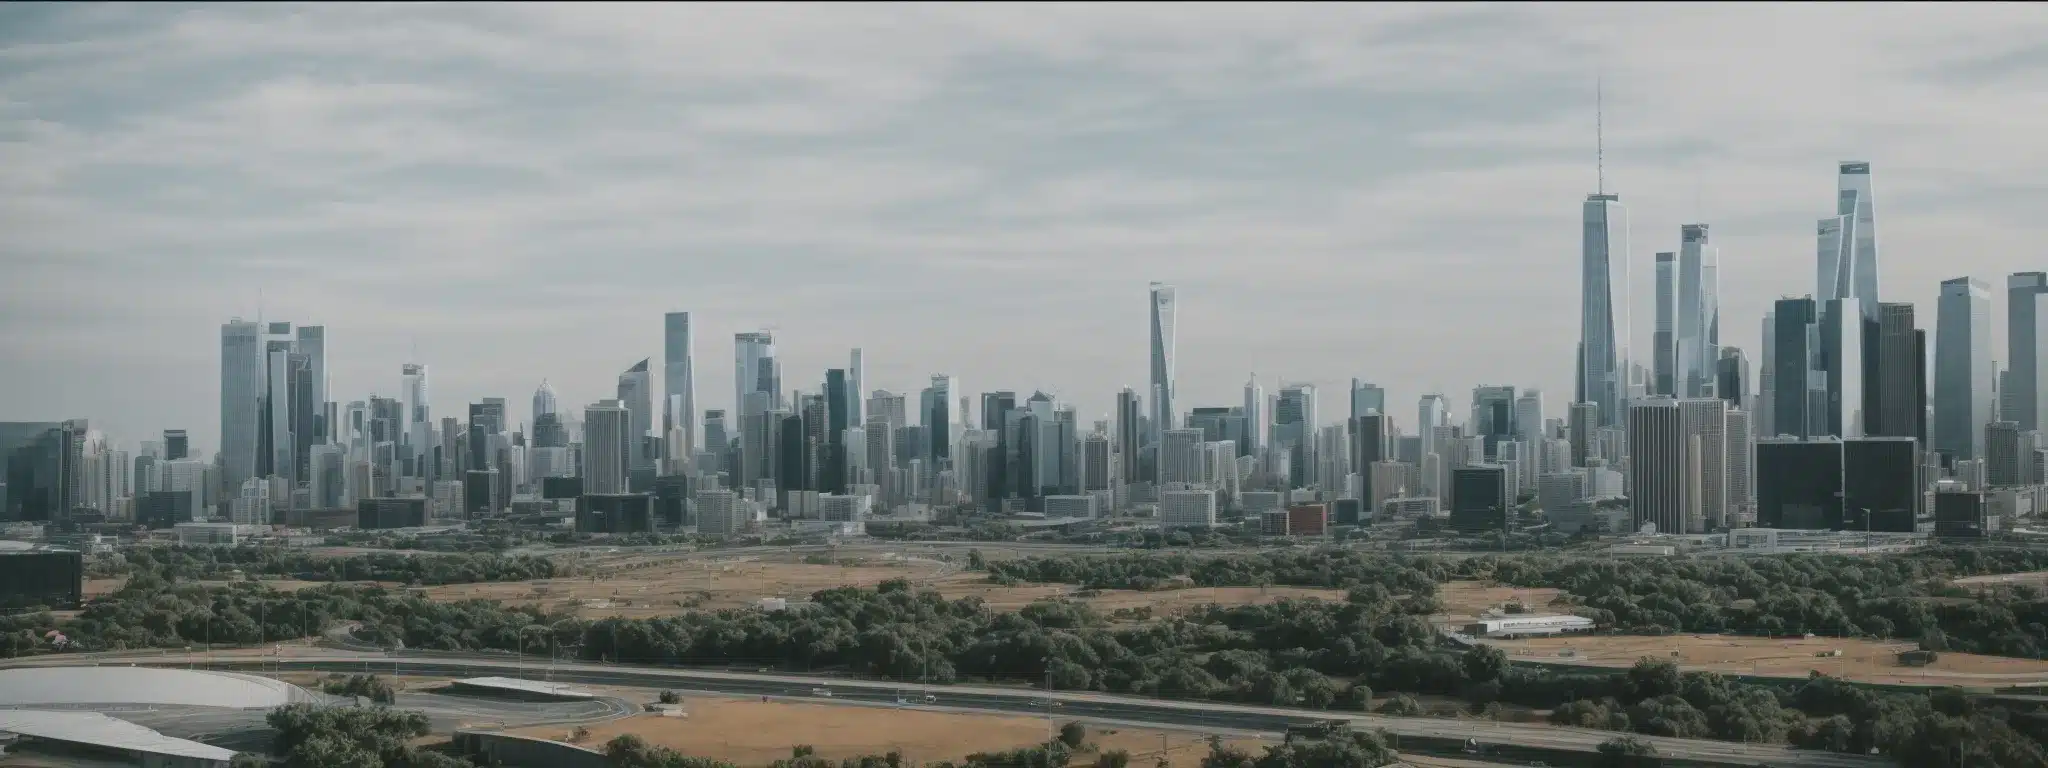 A Panoramic View Of A Clean, Modern City Skyline With Minimalistic Architecture And Wide Open Spaces.